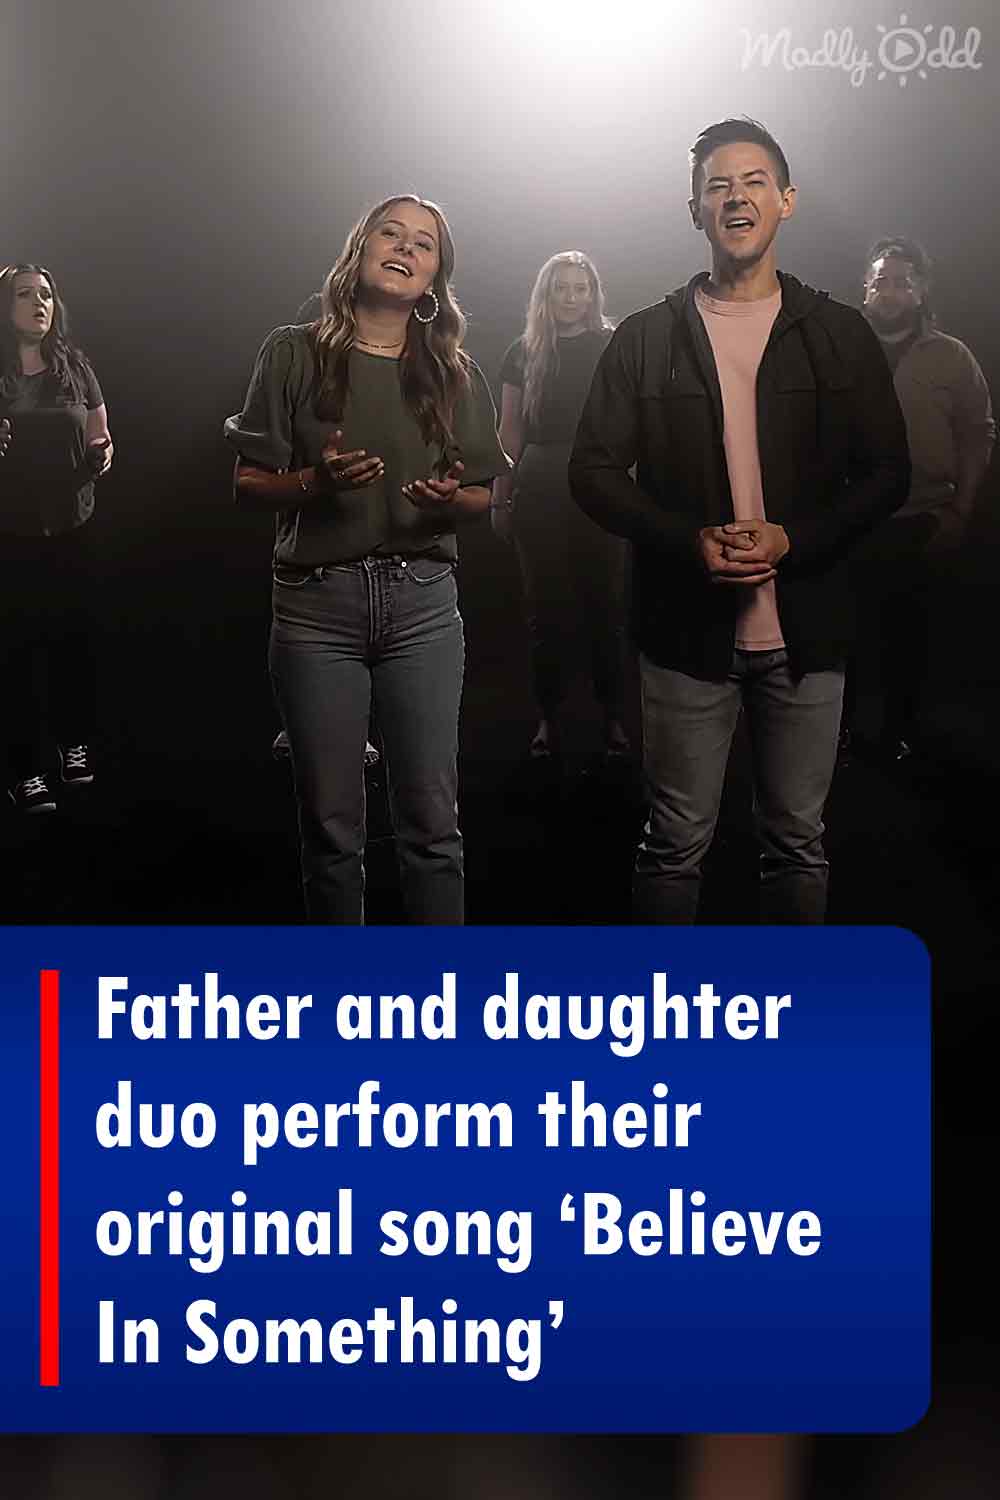 Father and daughter duo perform their original song ‘Believe In Something’